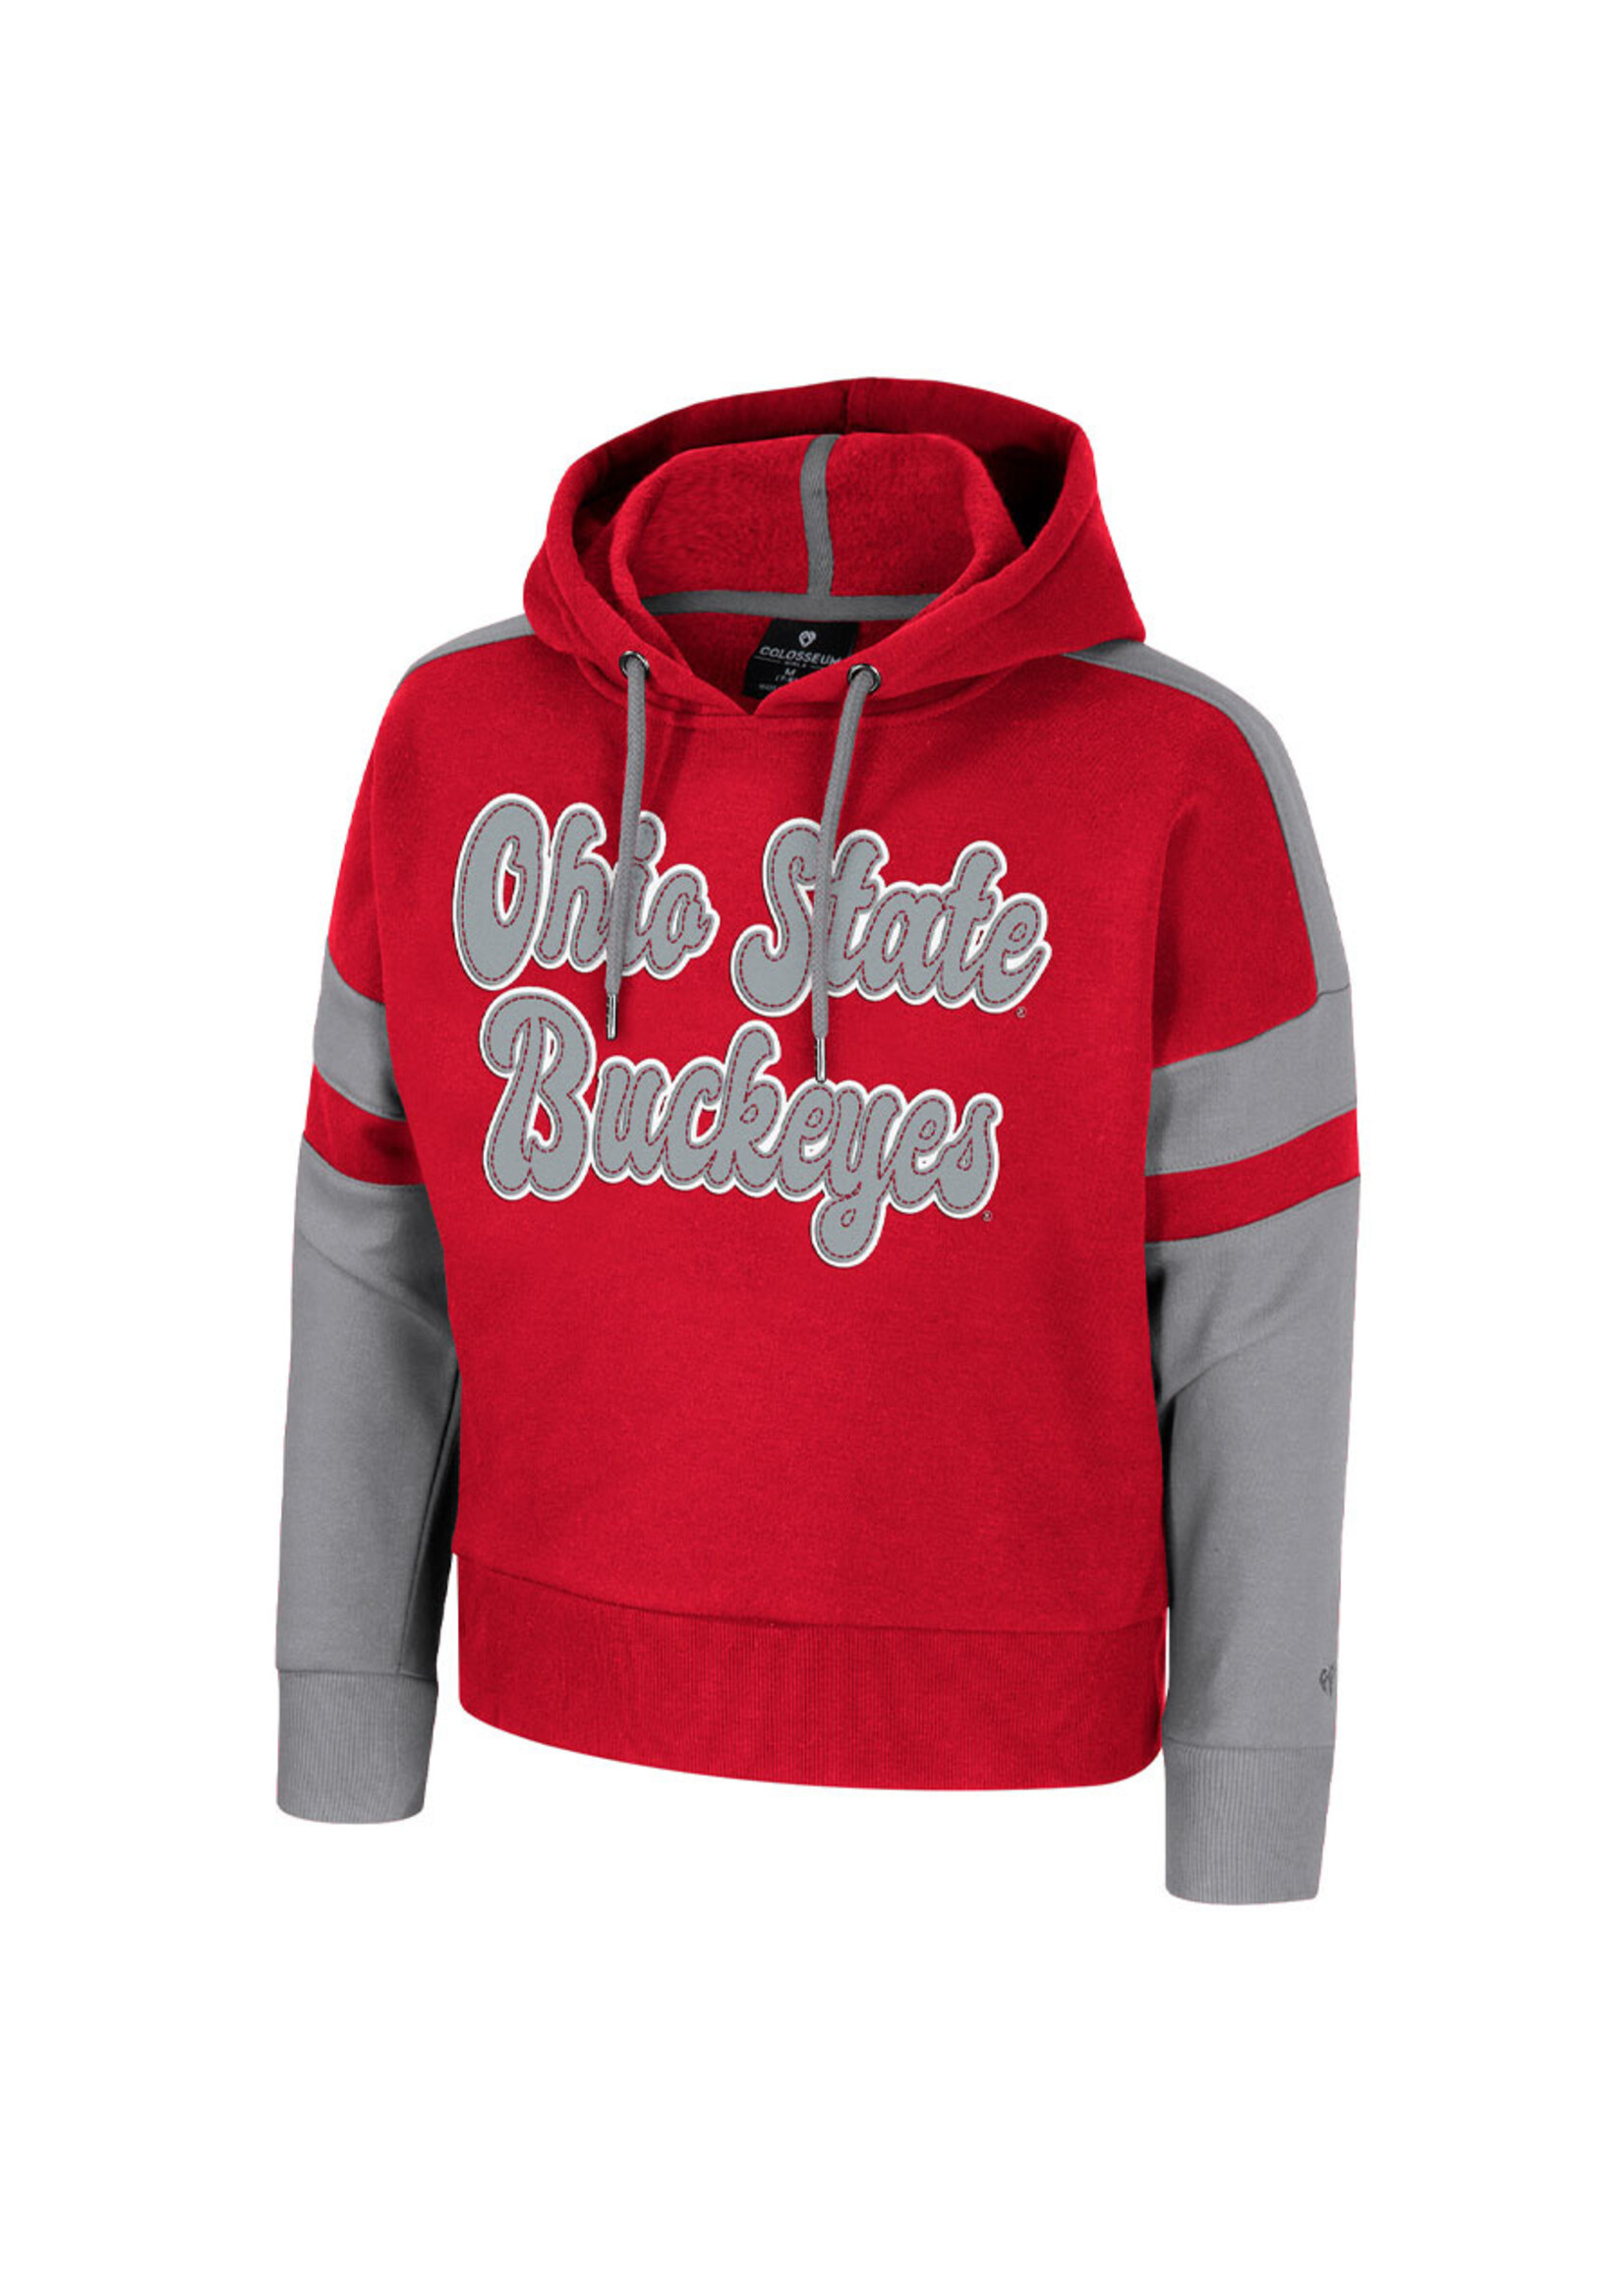 Colosseum Athletics Ohio State Buckeyes Girls Youth Band Manager Hoodie